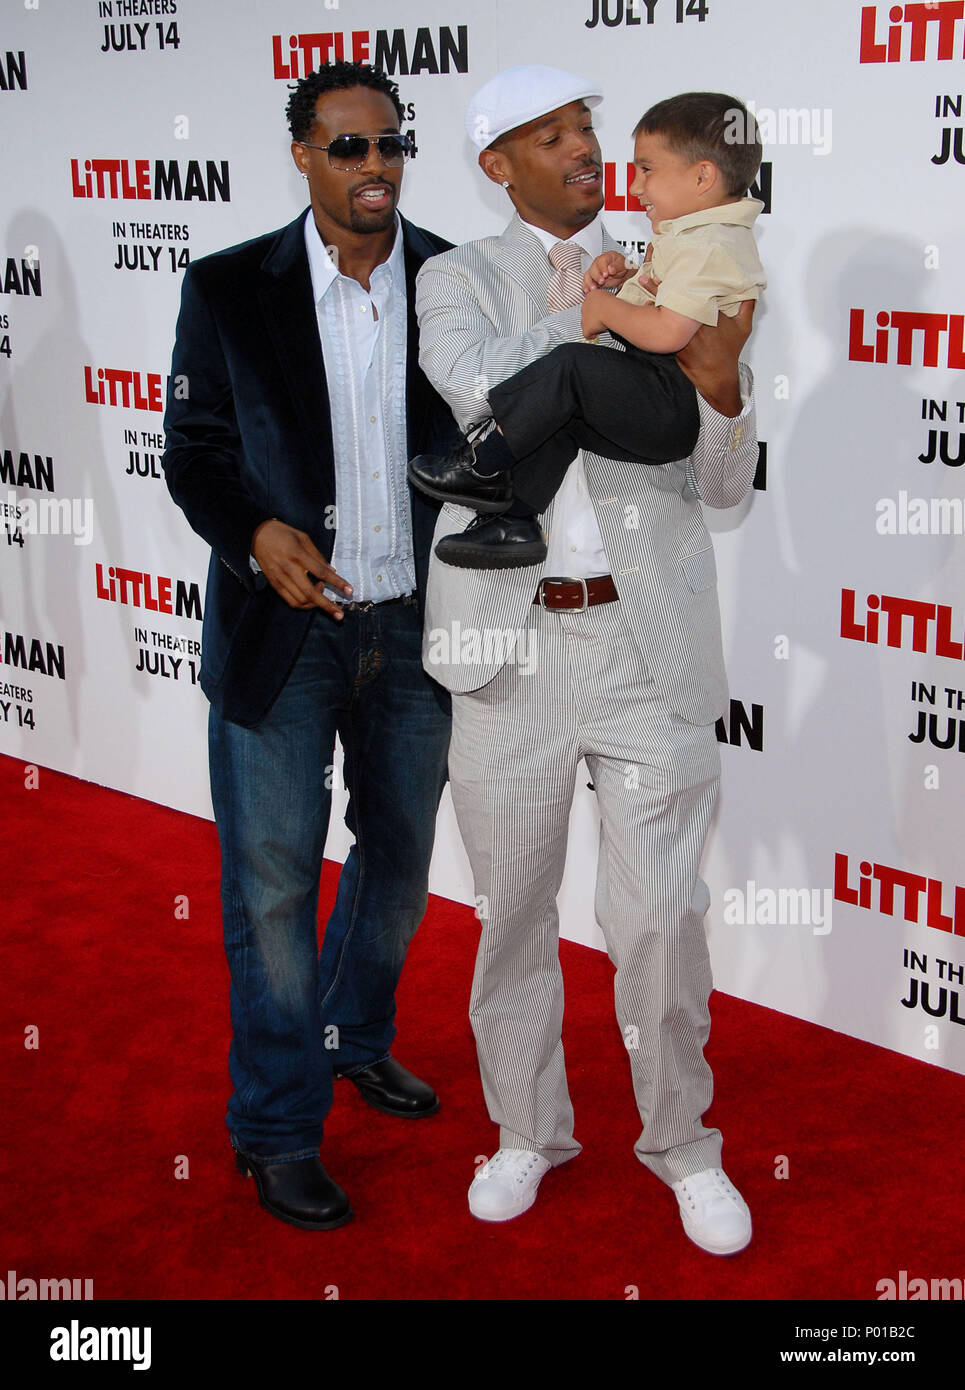 Shawn Wayans with brother Marlon and Gabe Pimentel  arriving at the LITTLE MAN Premiere at the National Theatre  In Los Angeles. July 6,  2006.WayansM Shawn PimentalGabe20  Event in Hollywood Life - California, Red Carpet Event, USA, Film Industry, Celebrities, Photography, Bestof, Arts Culture and Entertainment, Celebrities fashion, Best of, Hollywood Life, Event in Hollywood Life - California, Red Carpet and backstage, Music celebrities, Topix, Couple, family ( husband and wife ) and kids- Children, brothers and sisters inquiry tsuni@Gamma-USA.com, Credit Tsuni / USA, 2006 to 2009 Stock Photo